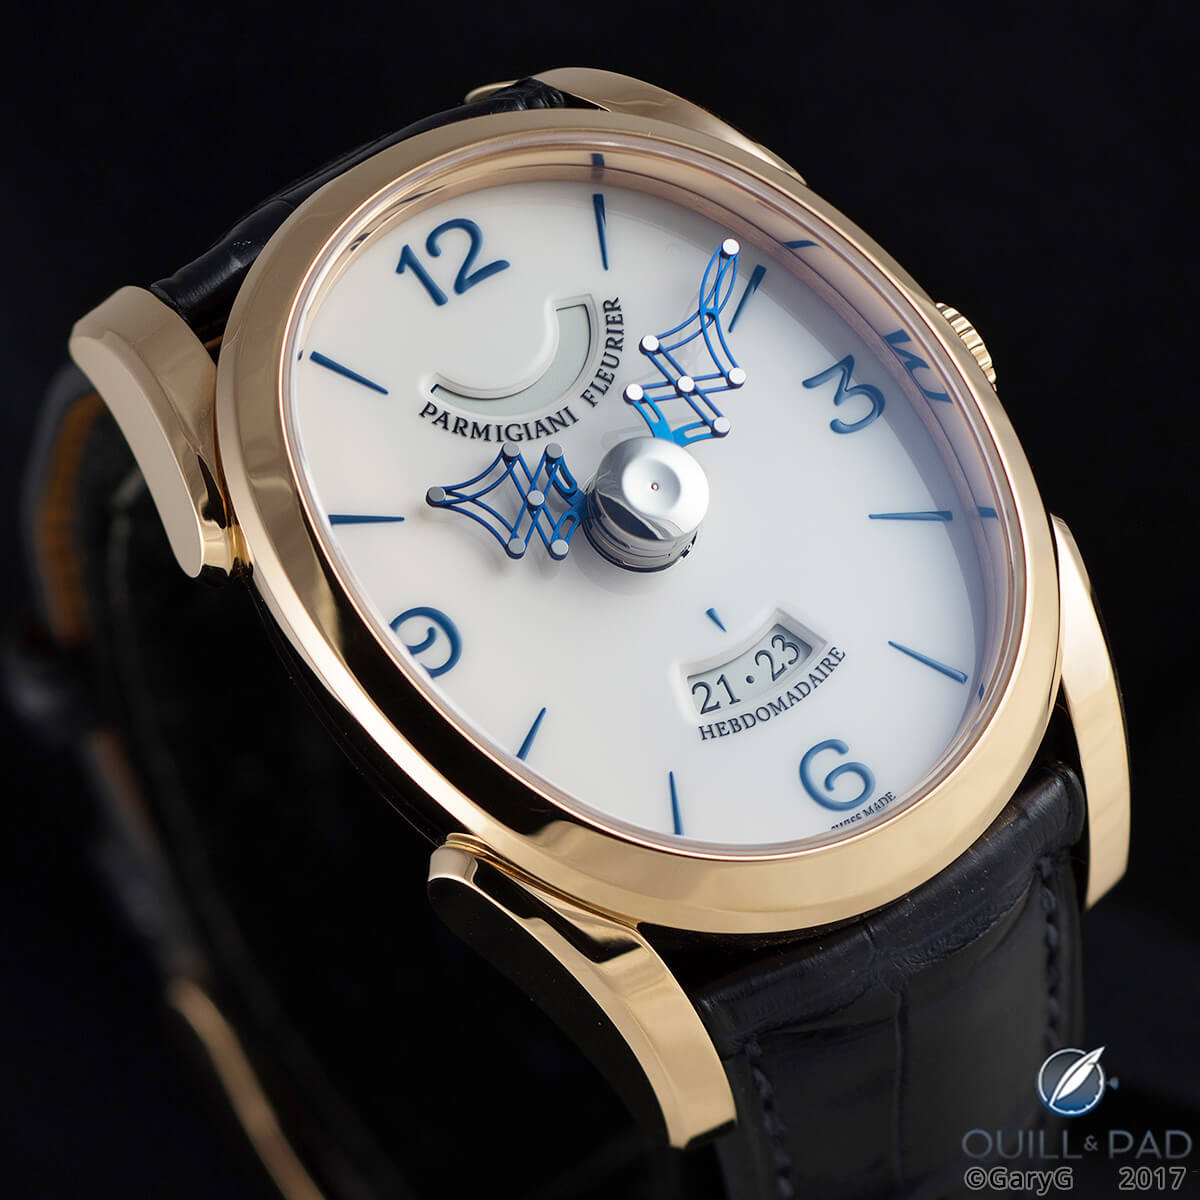 The Parmigiani Ovale Pantographe in red gold